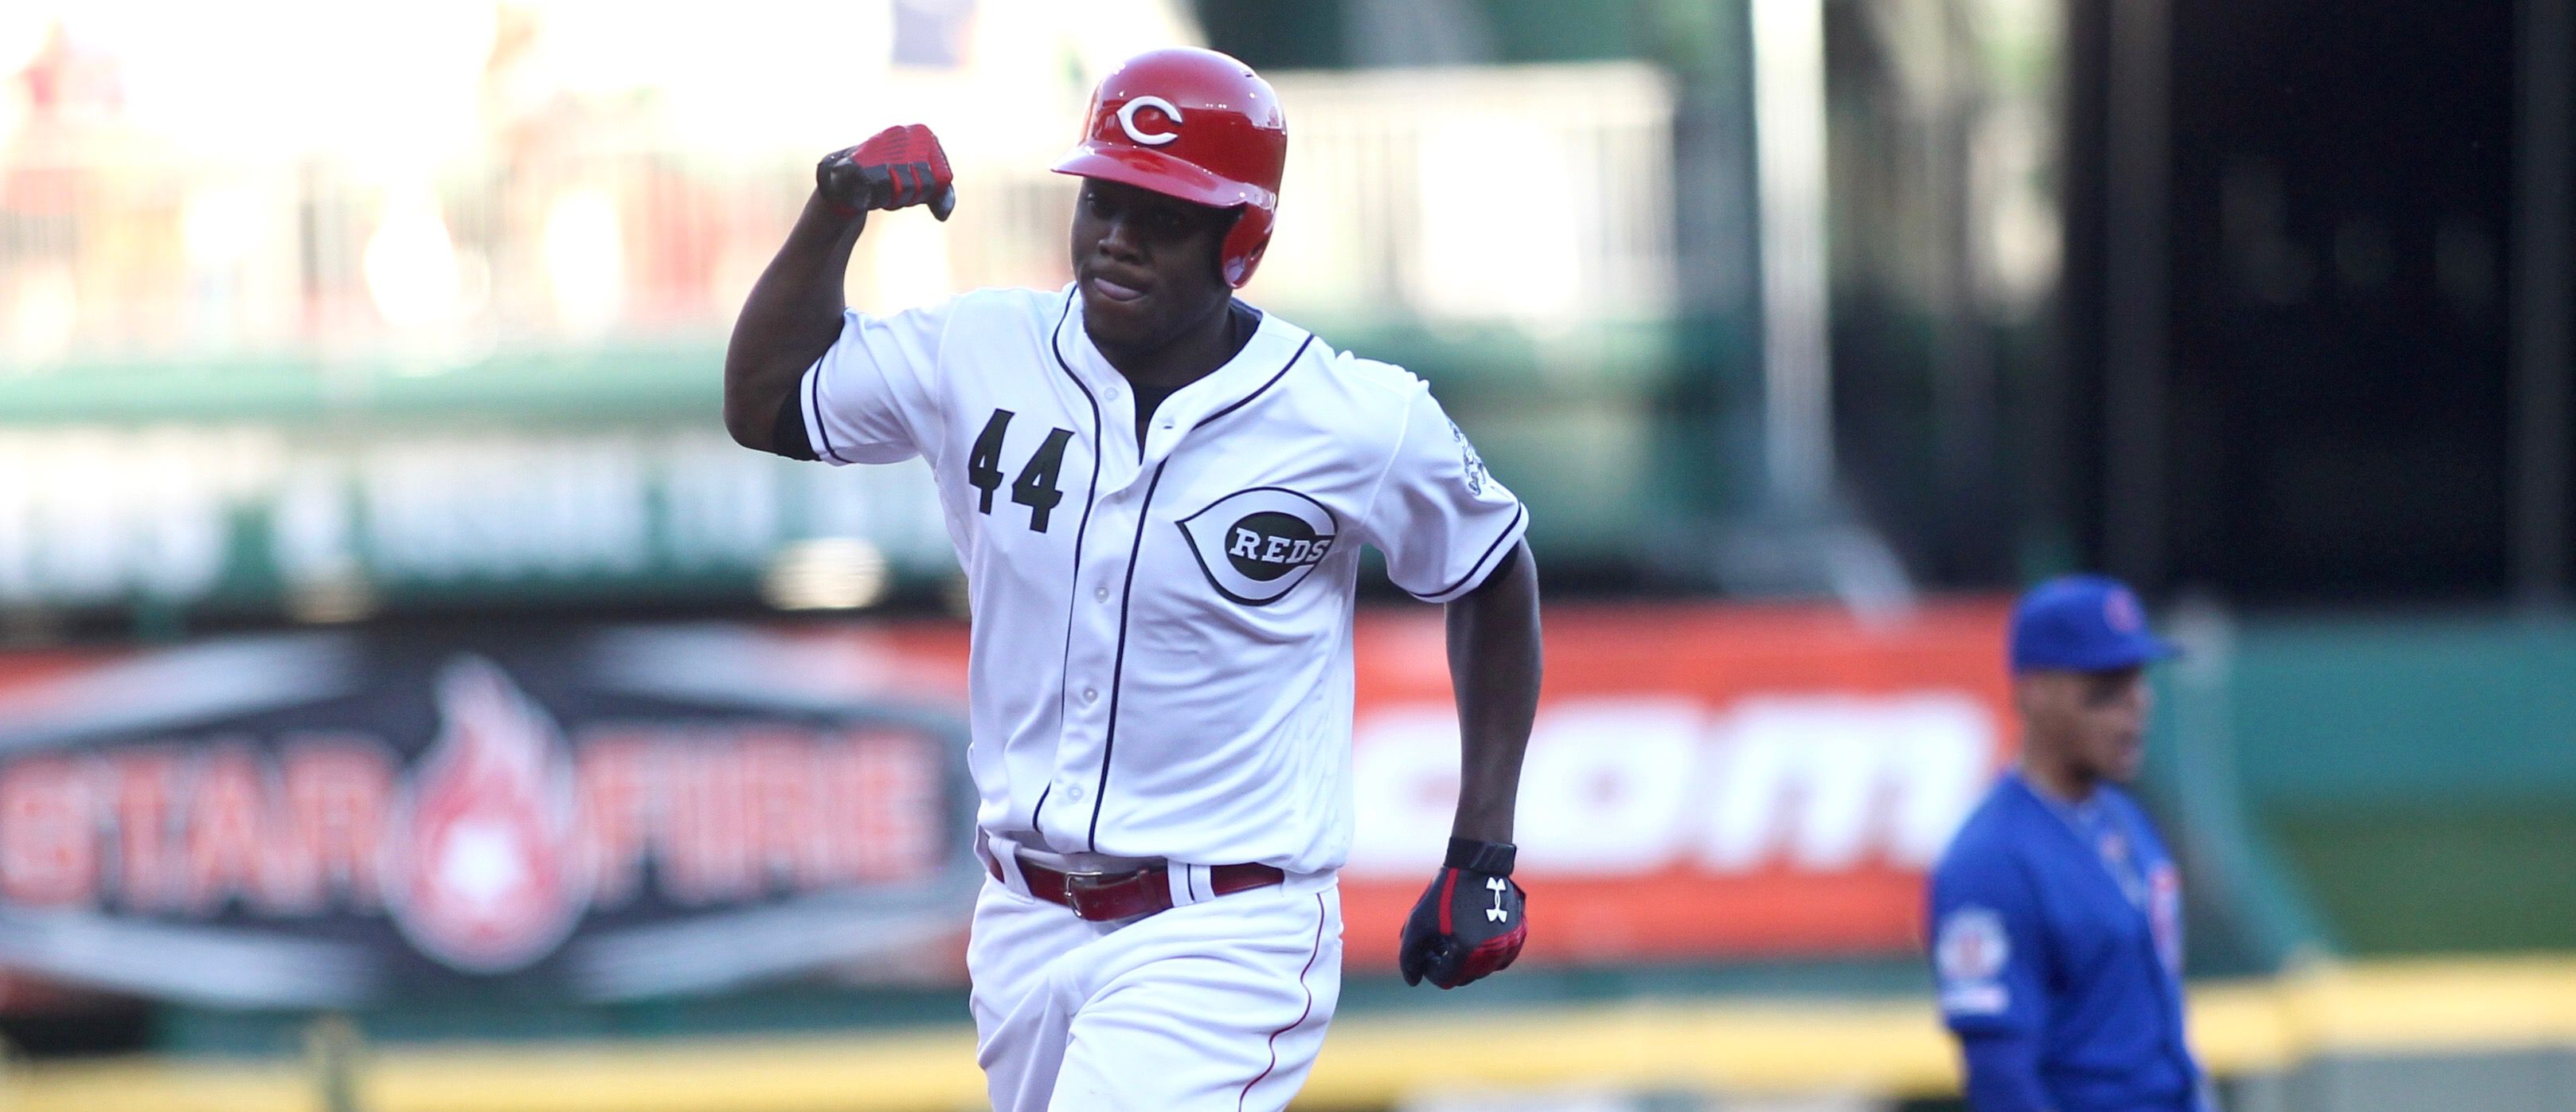 Reds rookie Aristides Aquino blasts three more homers in win - The